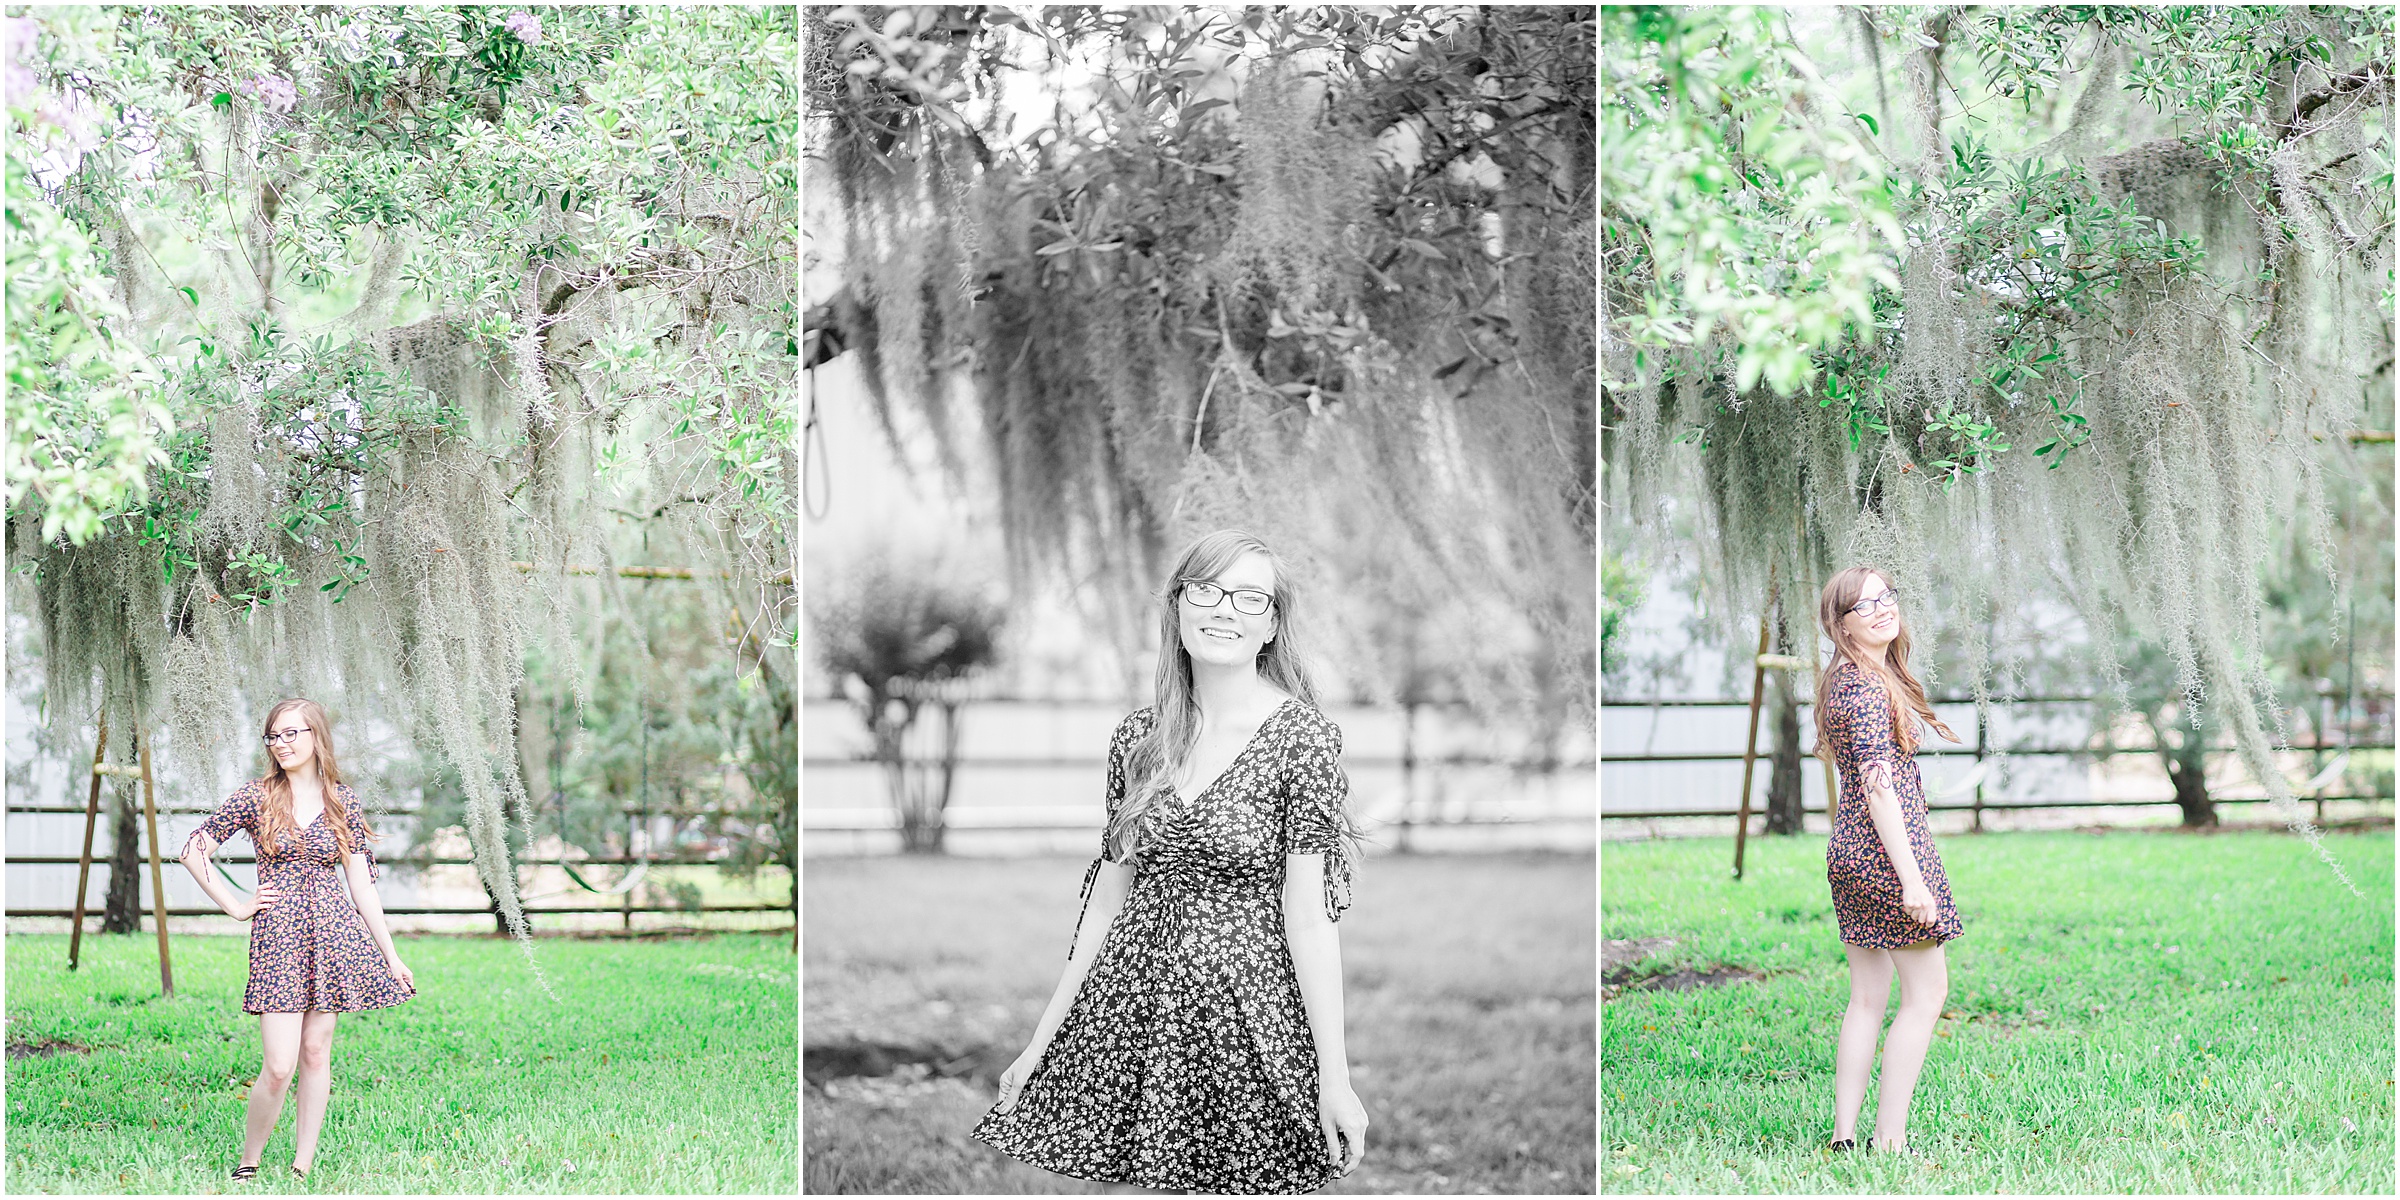 Hardee High School 2019 Senior, Hannah, takes senior pictures on a cloudy day in Wauchula, Florida.